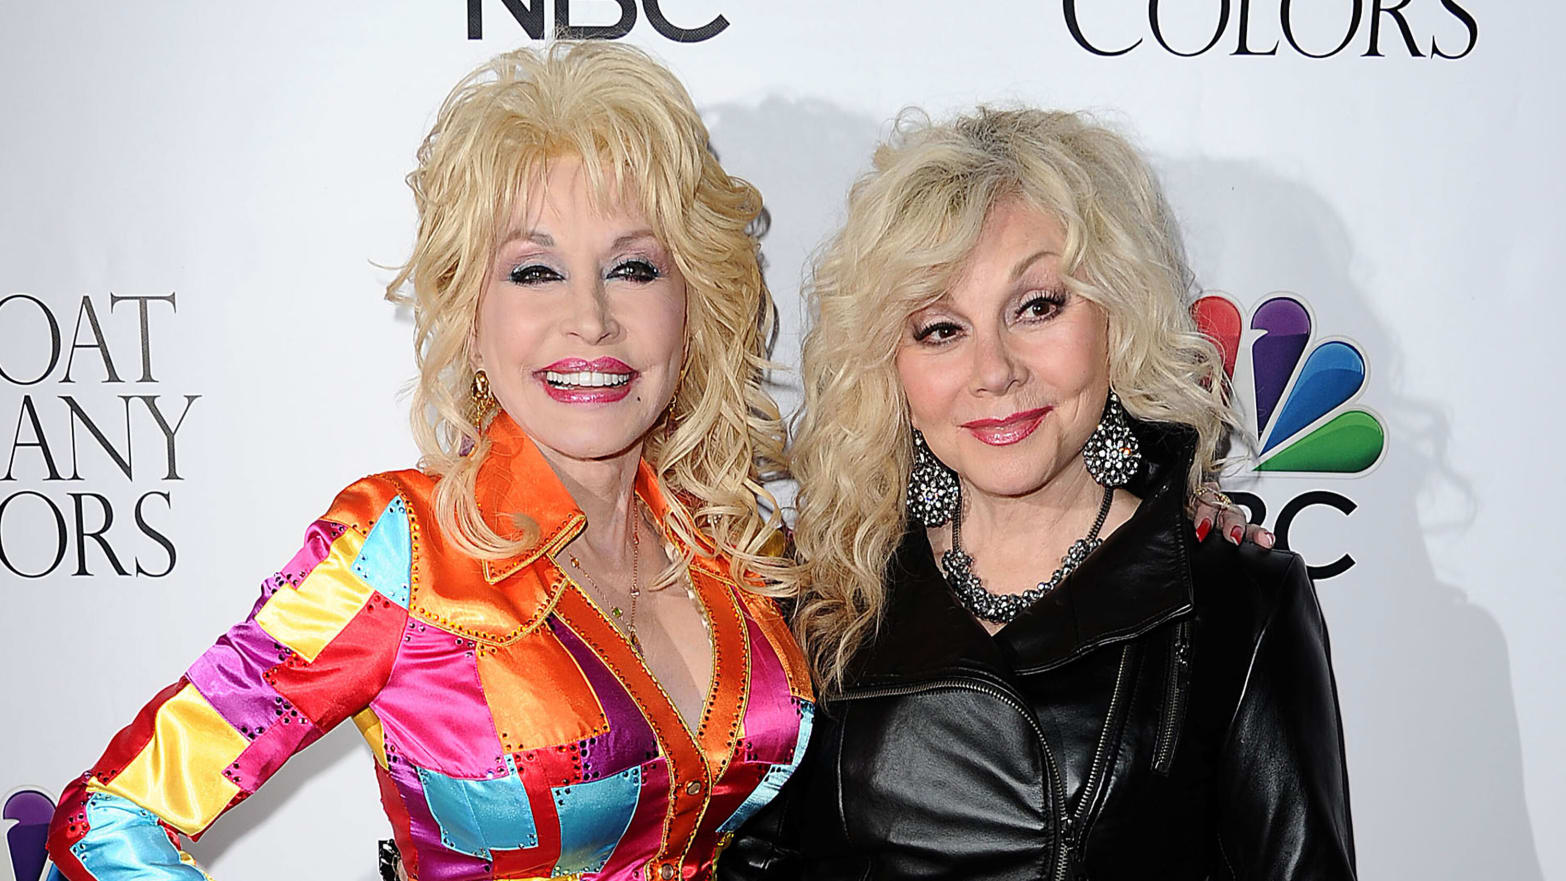 Dolly Parton’s sister Stella’s tweets are ‘racist’ dumpster fire